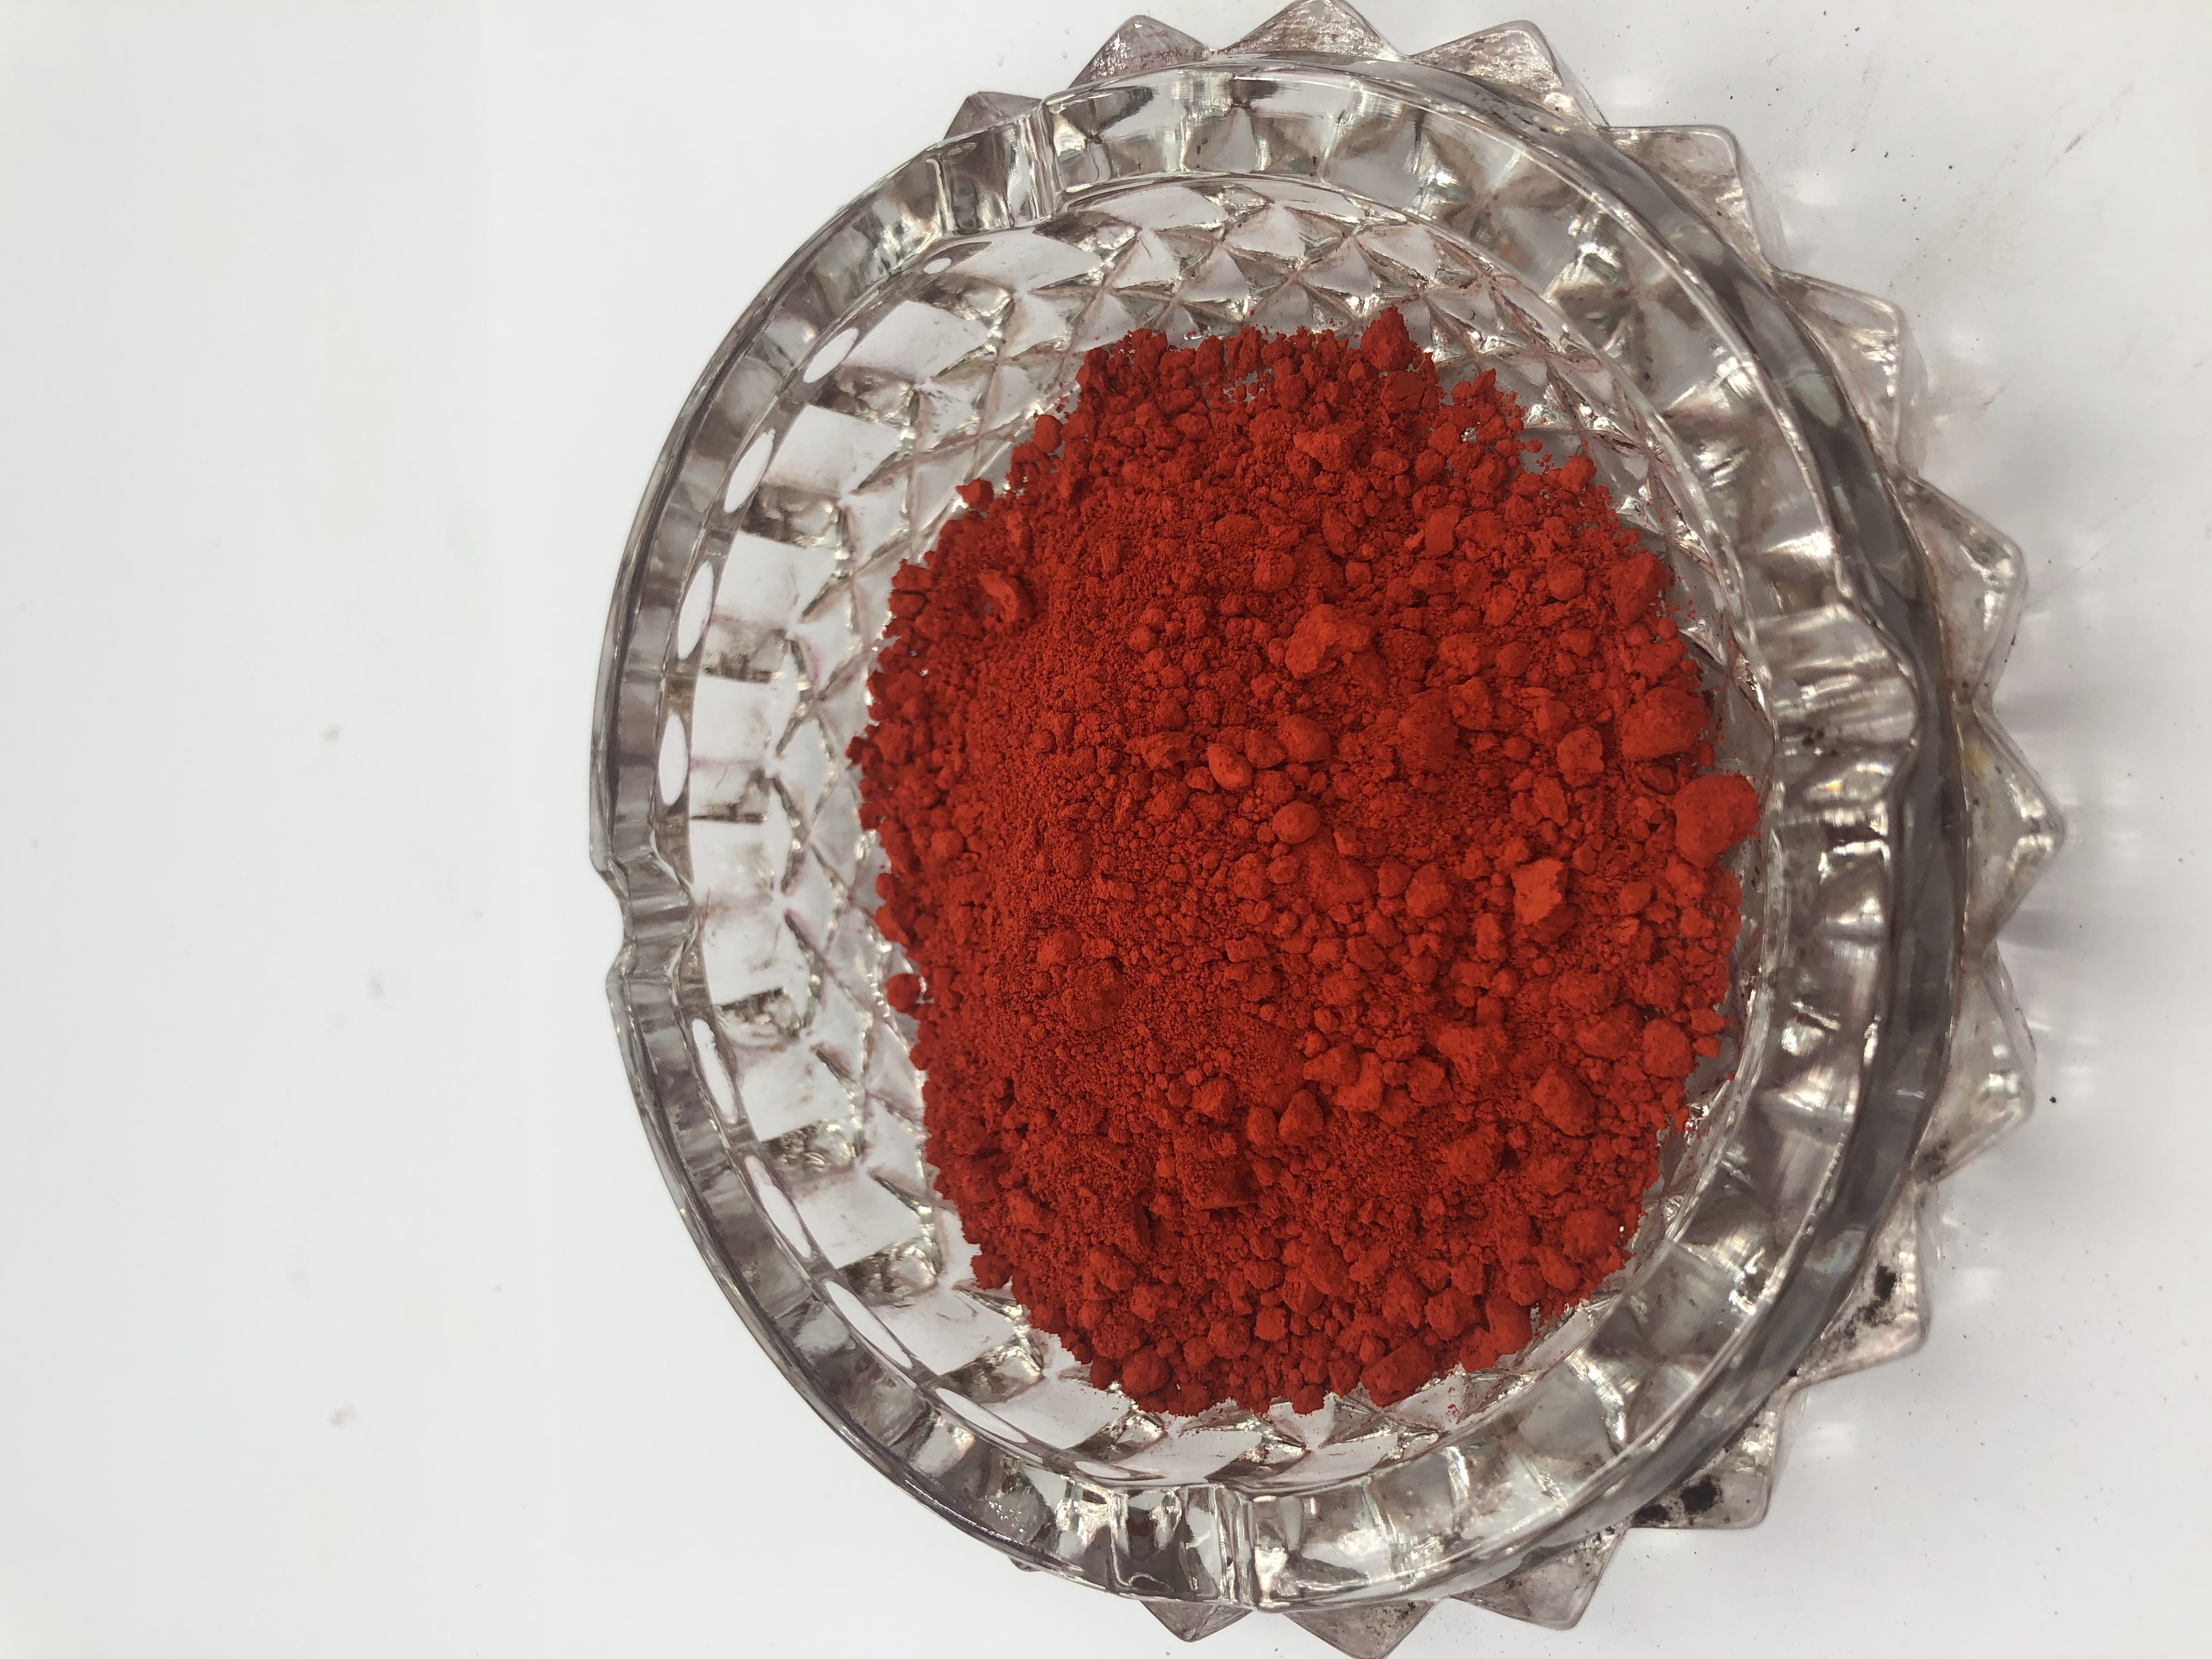 Seed Coating Colorants Pigment Powder Pigment Red R6BY-34 For SP/SL 